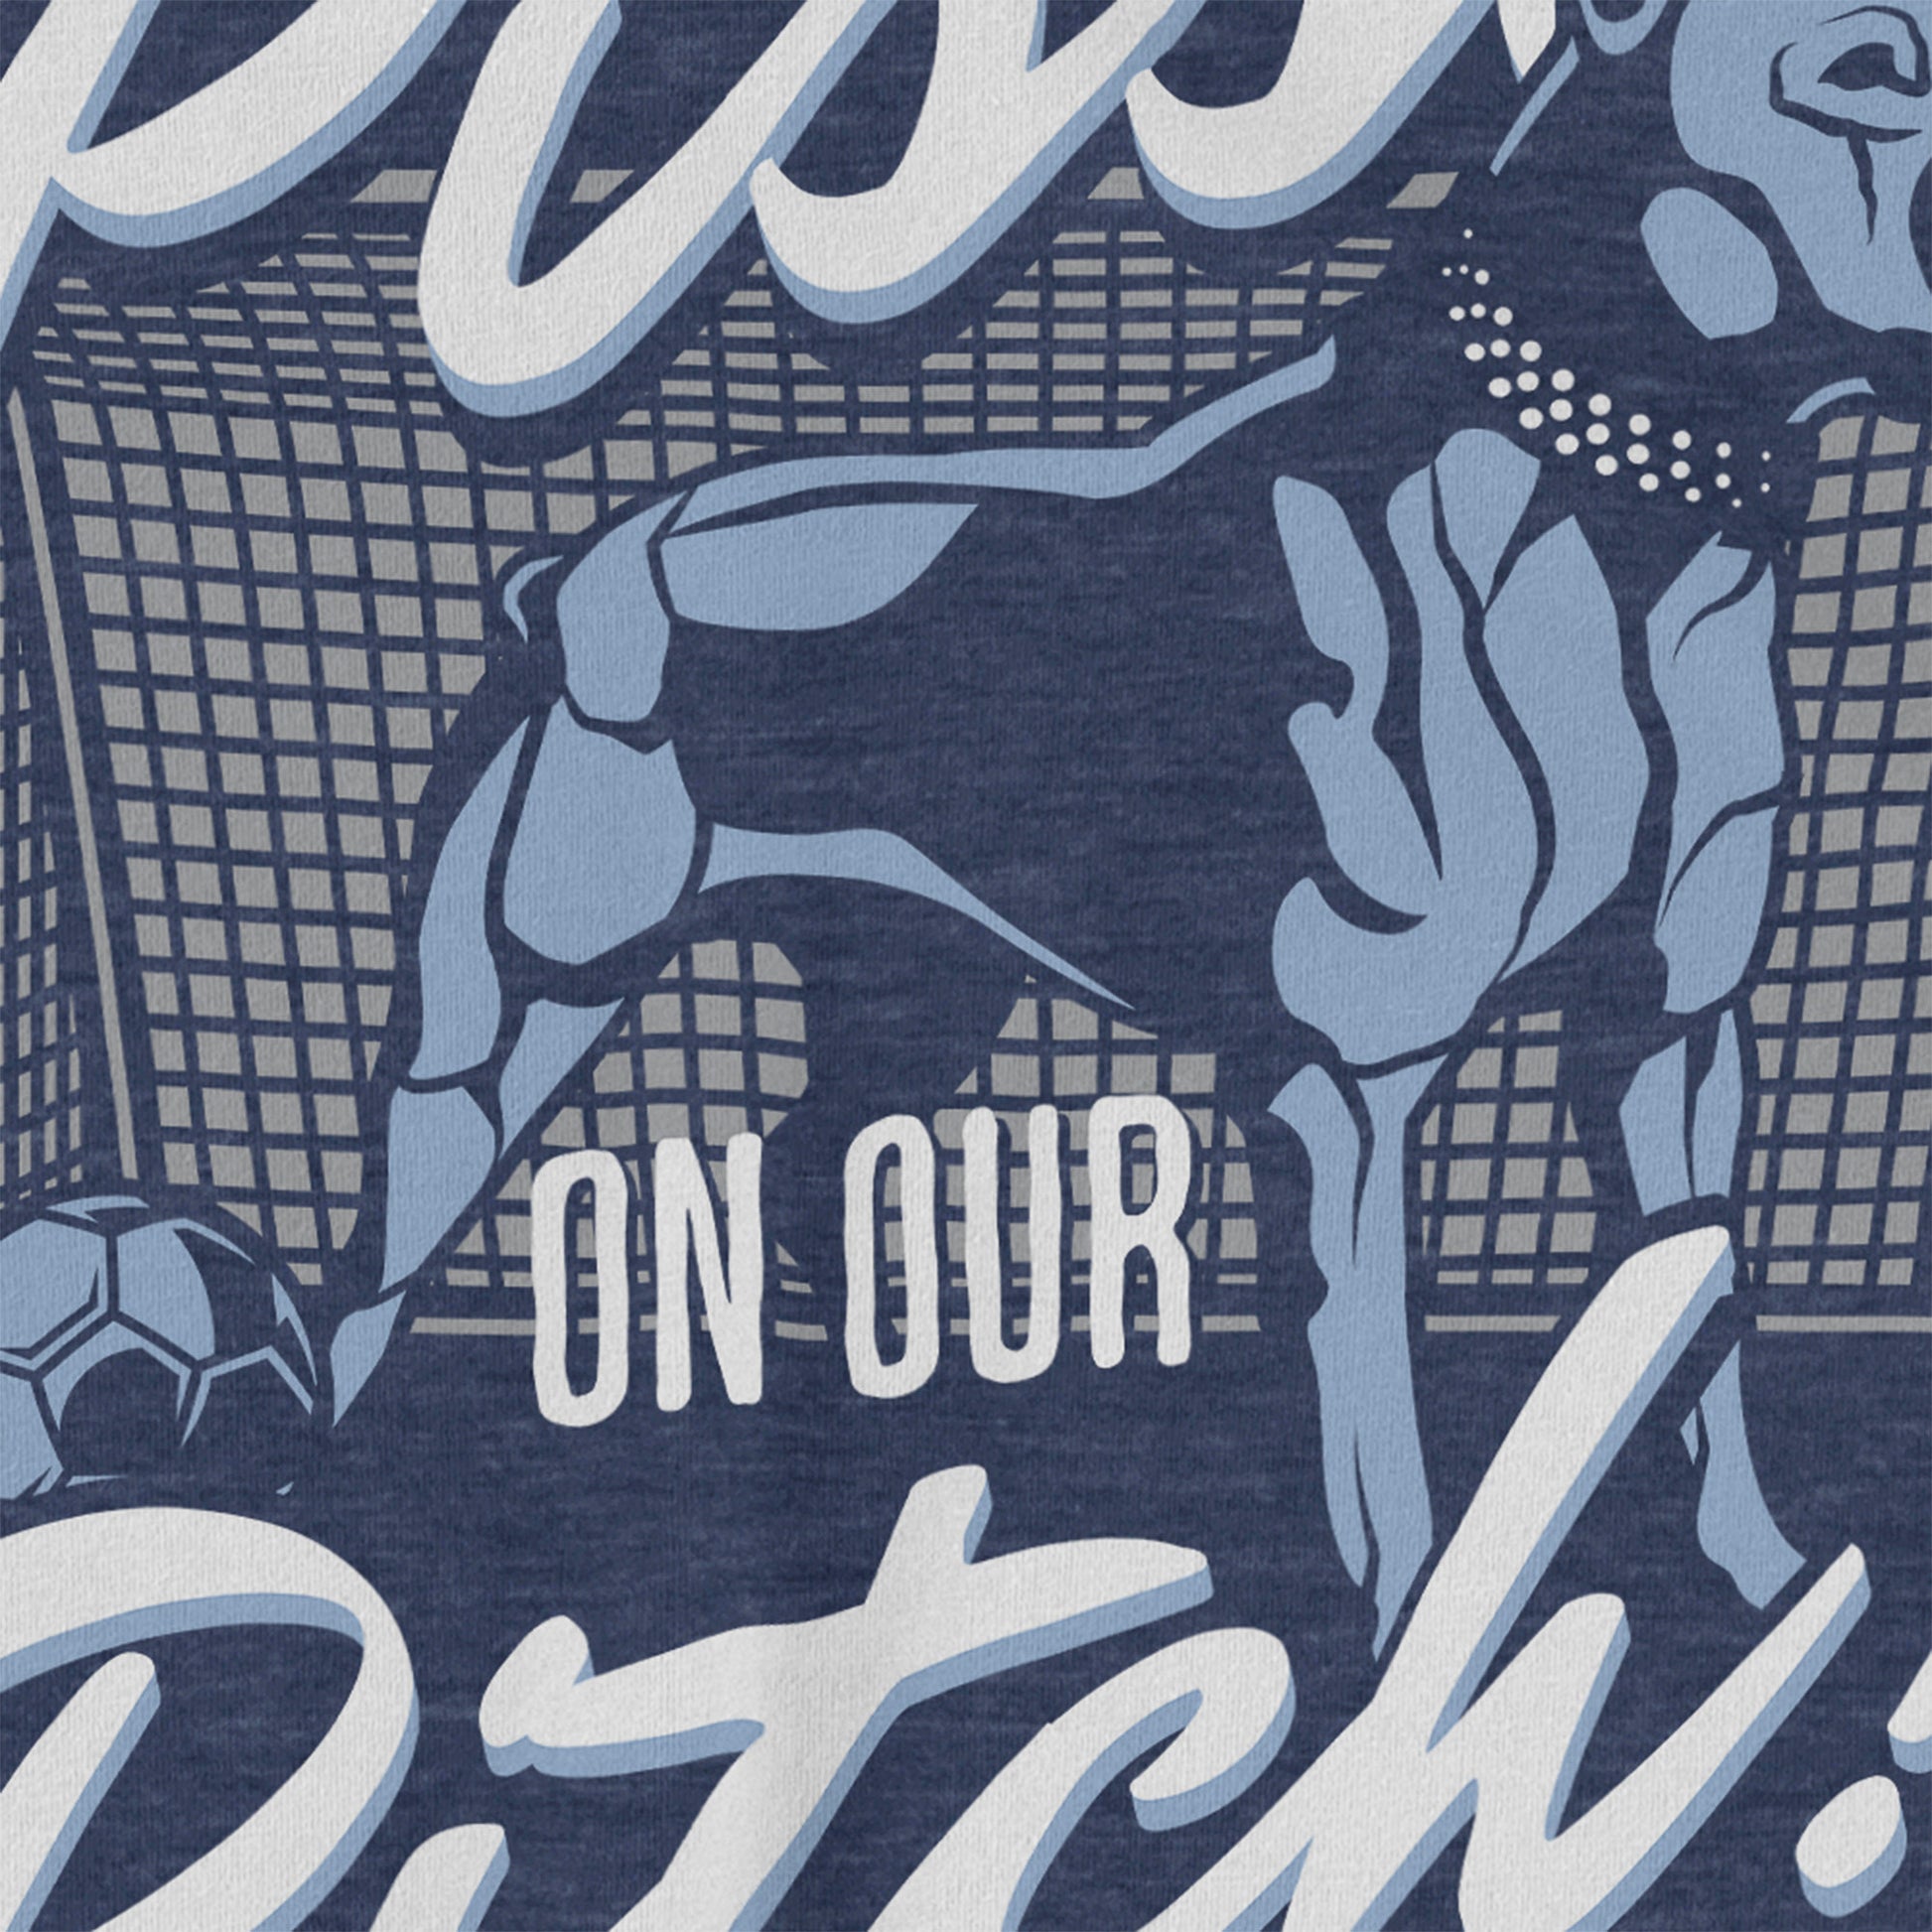 KC Swag Sporting Kansas City navy, powder, white, grey PITCH PROTECTOR on heather navy unisex t-shirt closeup details of printed graphics